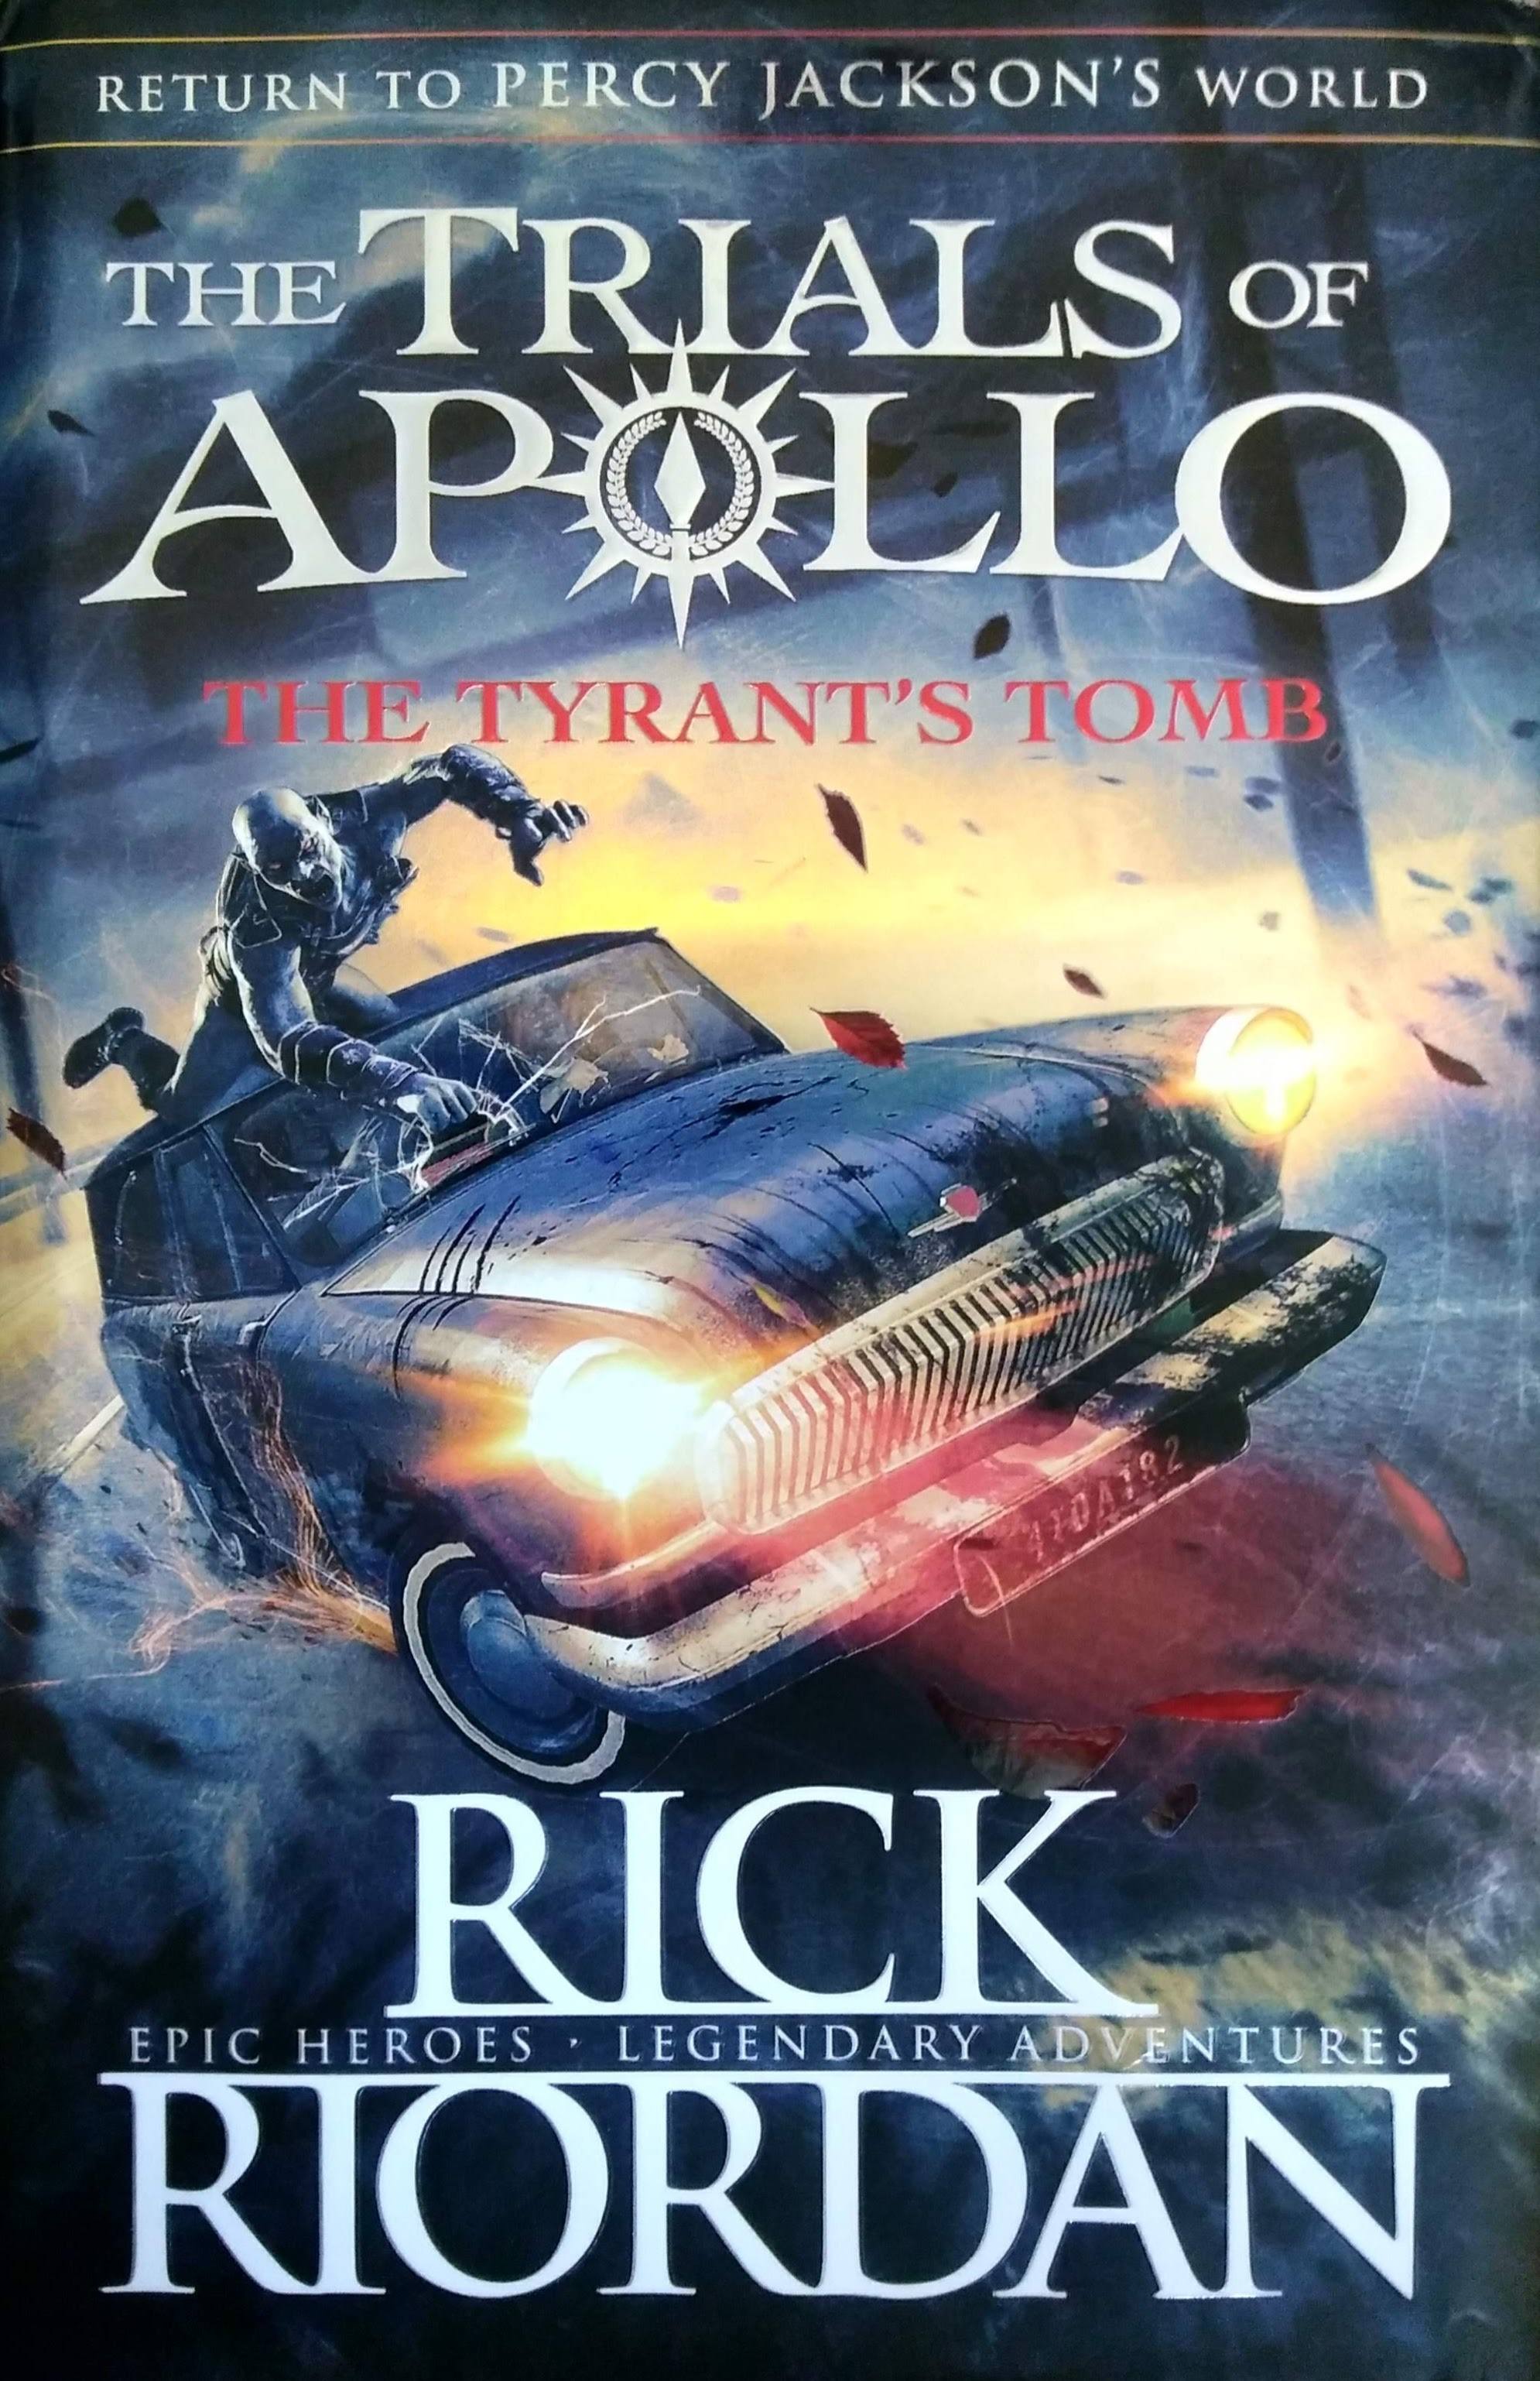 Rick Riordan Trials of Apollo - Cover of latest Rick Riordan book - The Trials of Apollo: The Tyrant's Tomb - feature image for full guide to Rick Riordan series in order